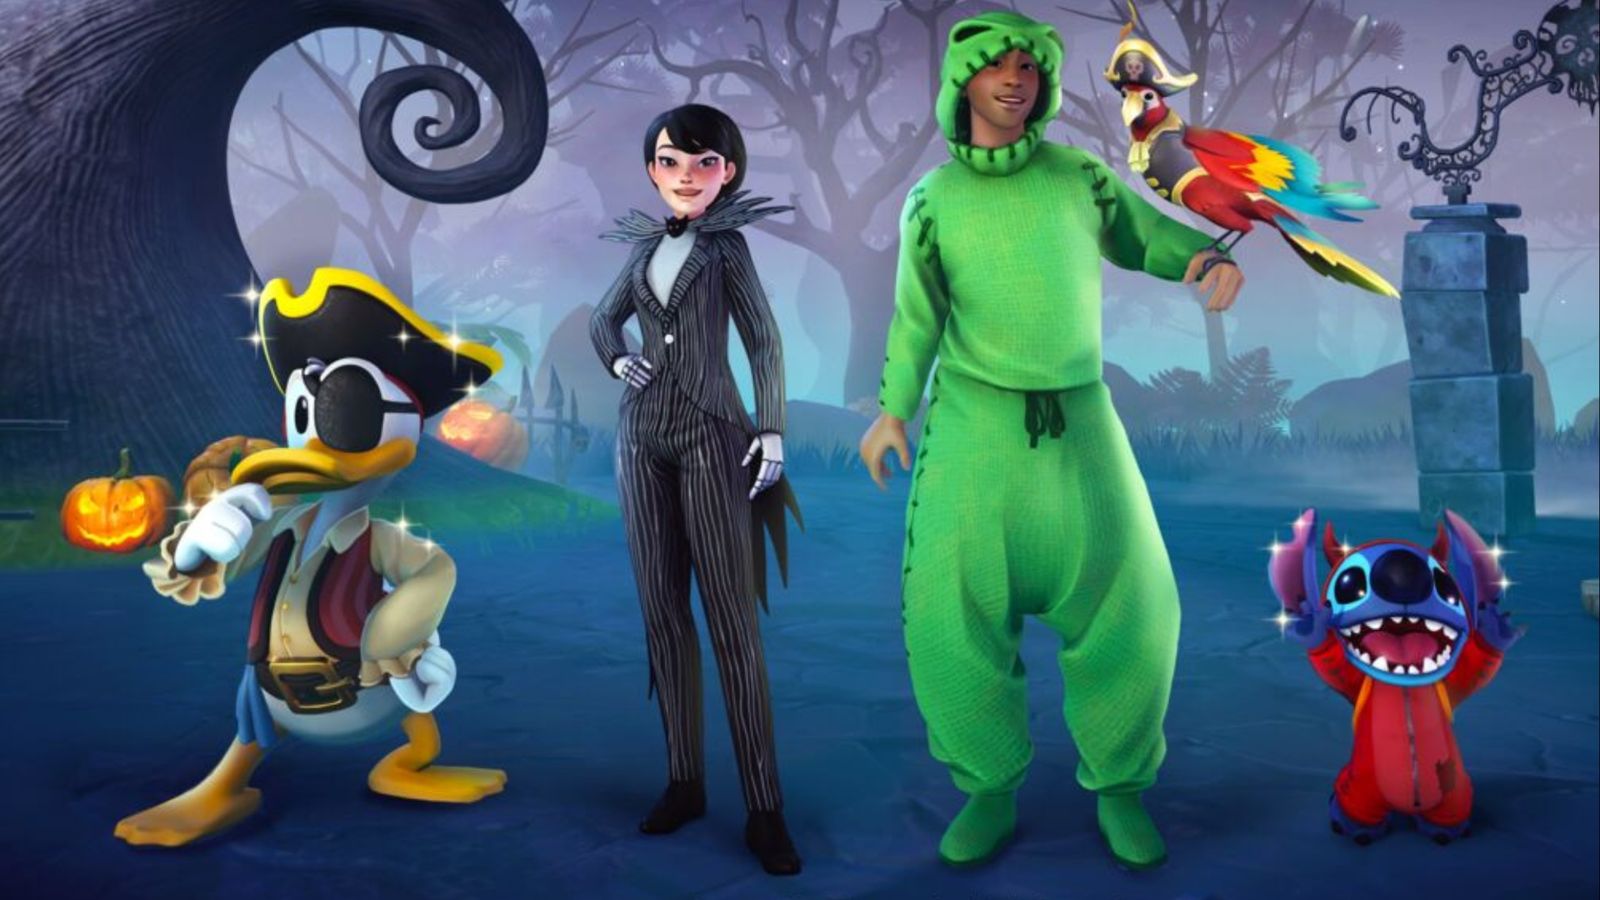 Donald Duck, Stitch, and two player characters wearing Disney-inspired outfits in Disney Dreamlight Valley